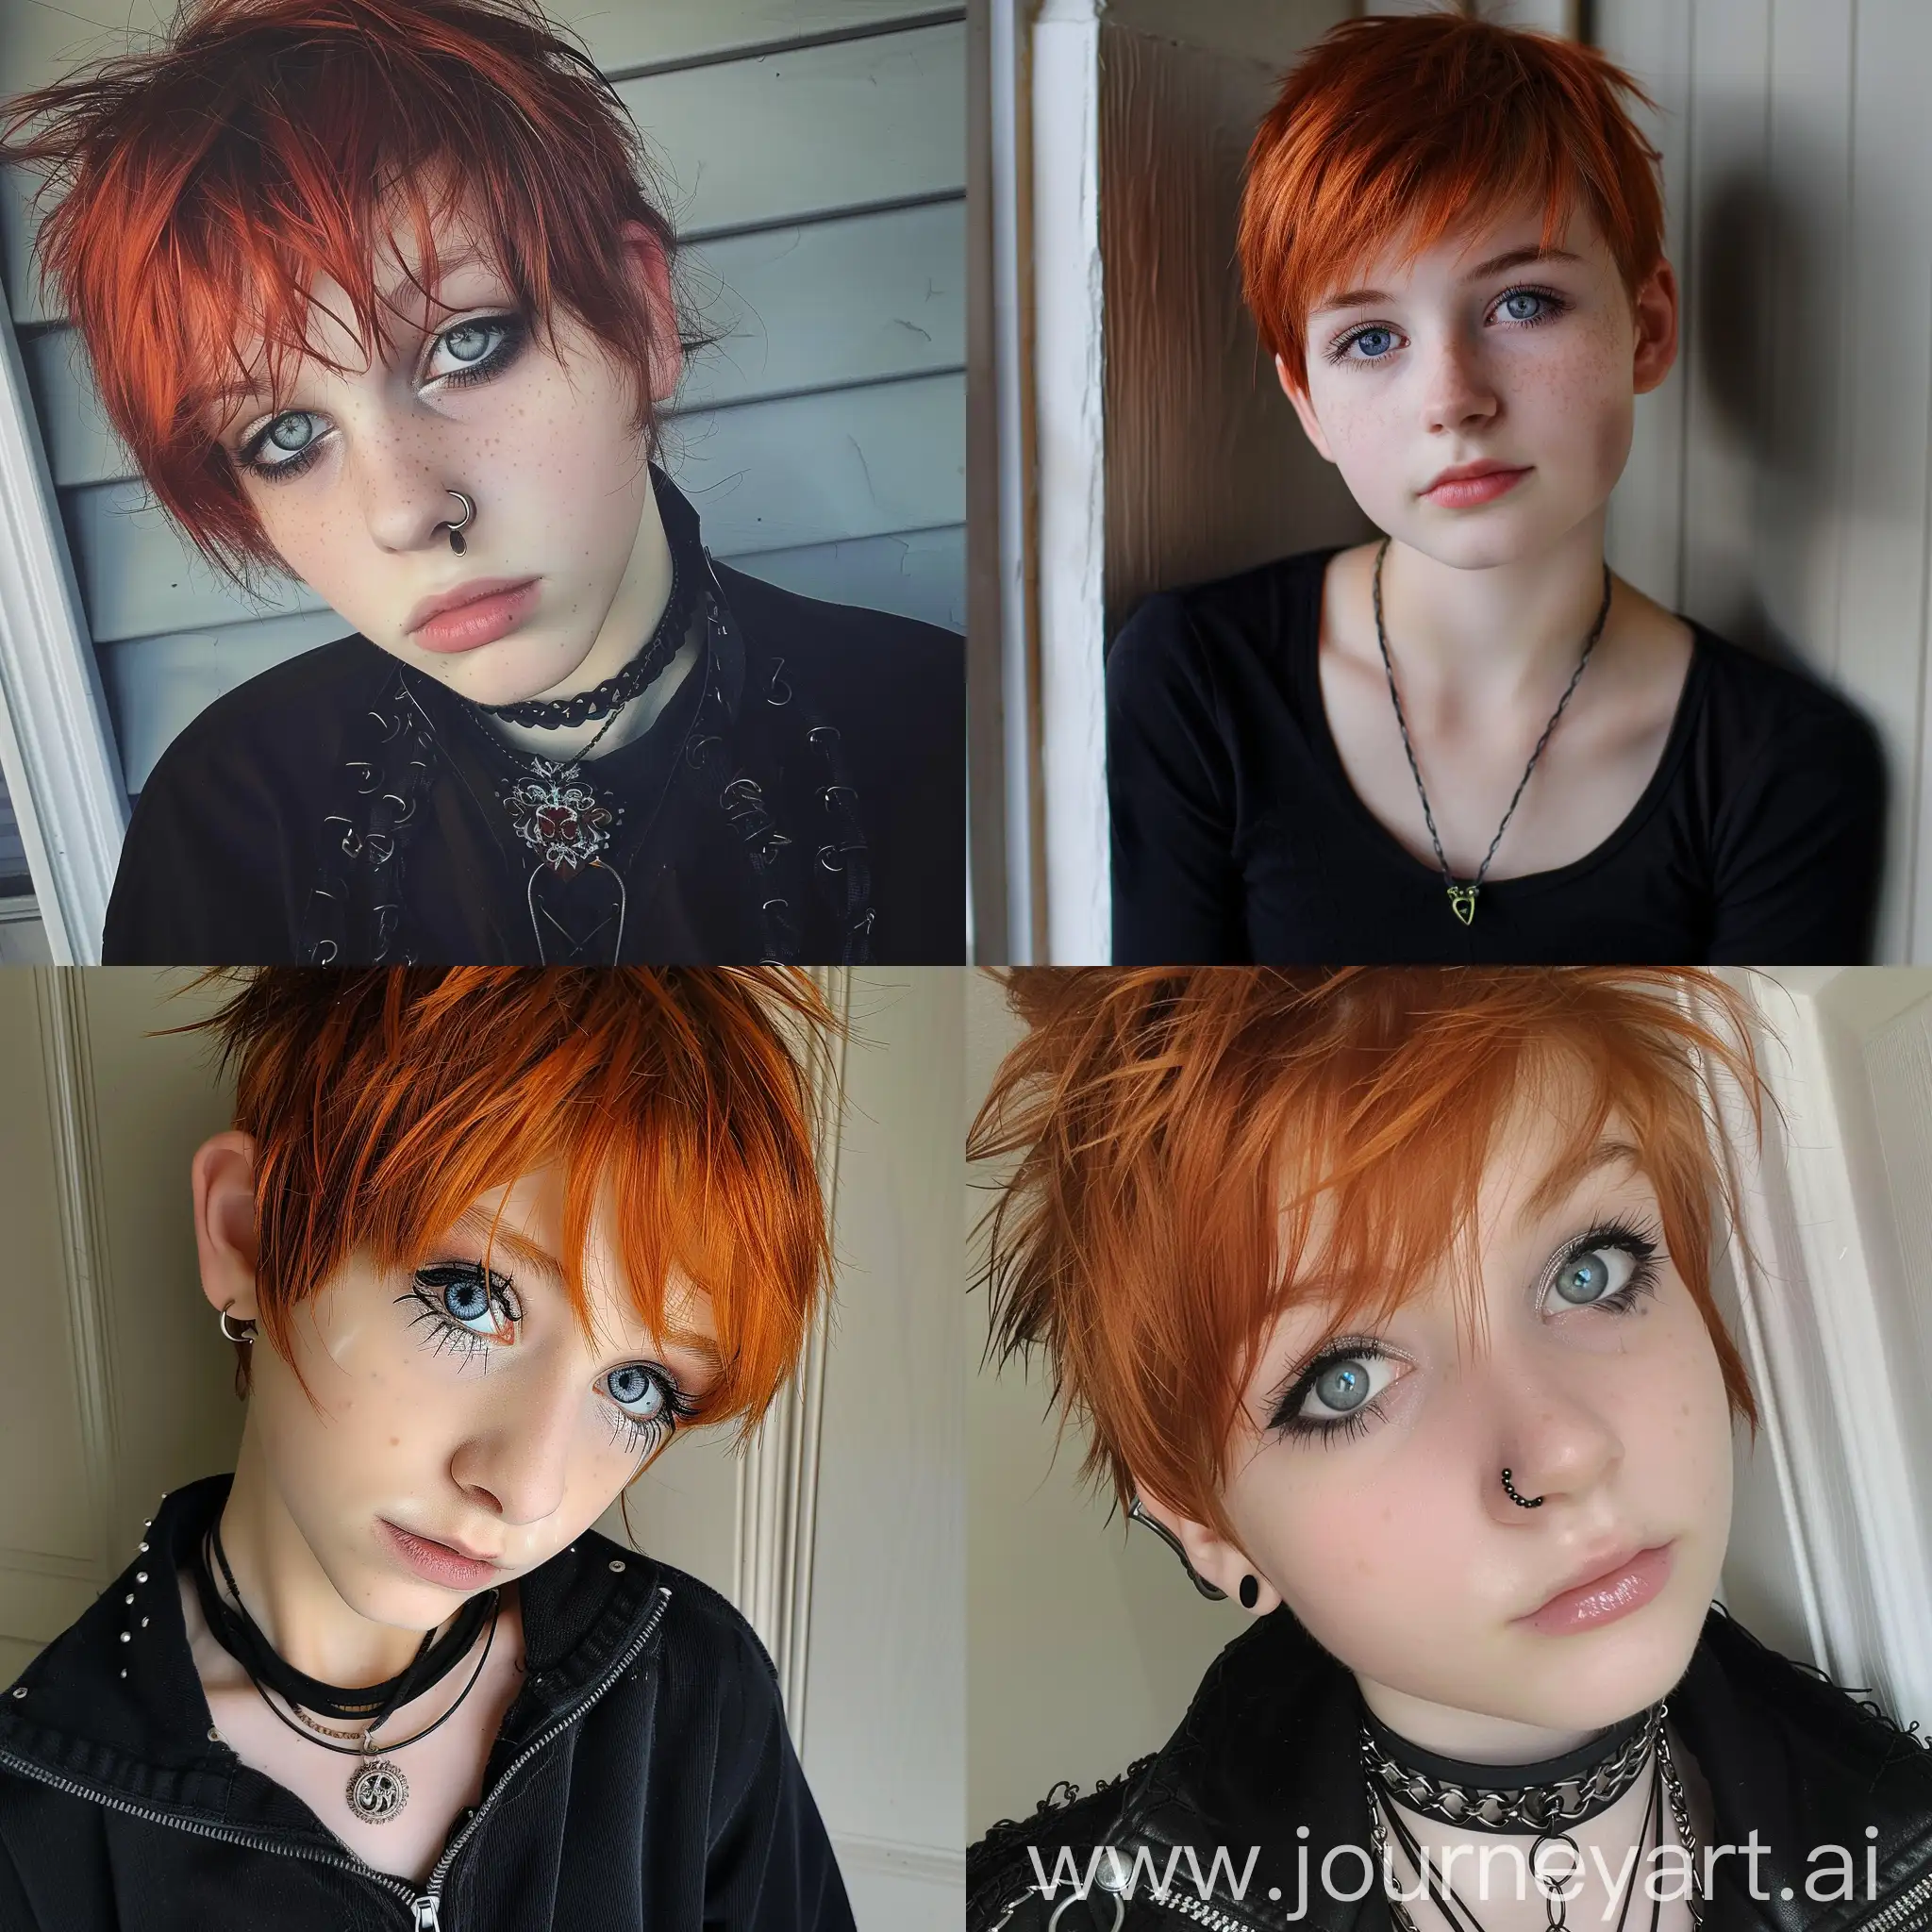 Goth-Teen-Girl-with-Pixie-Cut-and-Red-Hair-in-Ethereal-Portrait